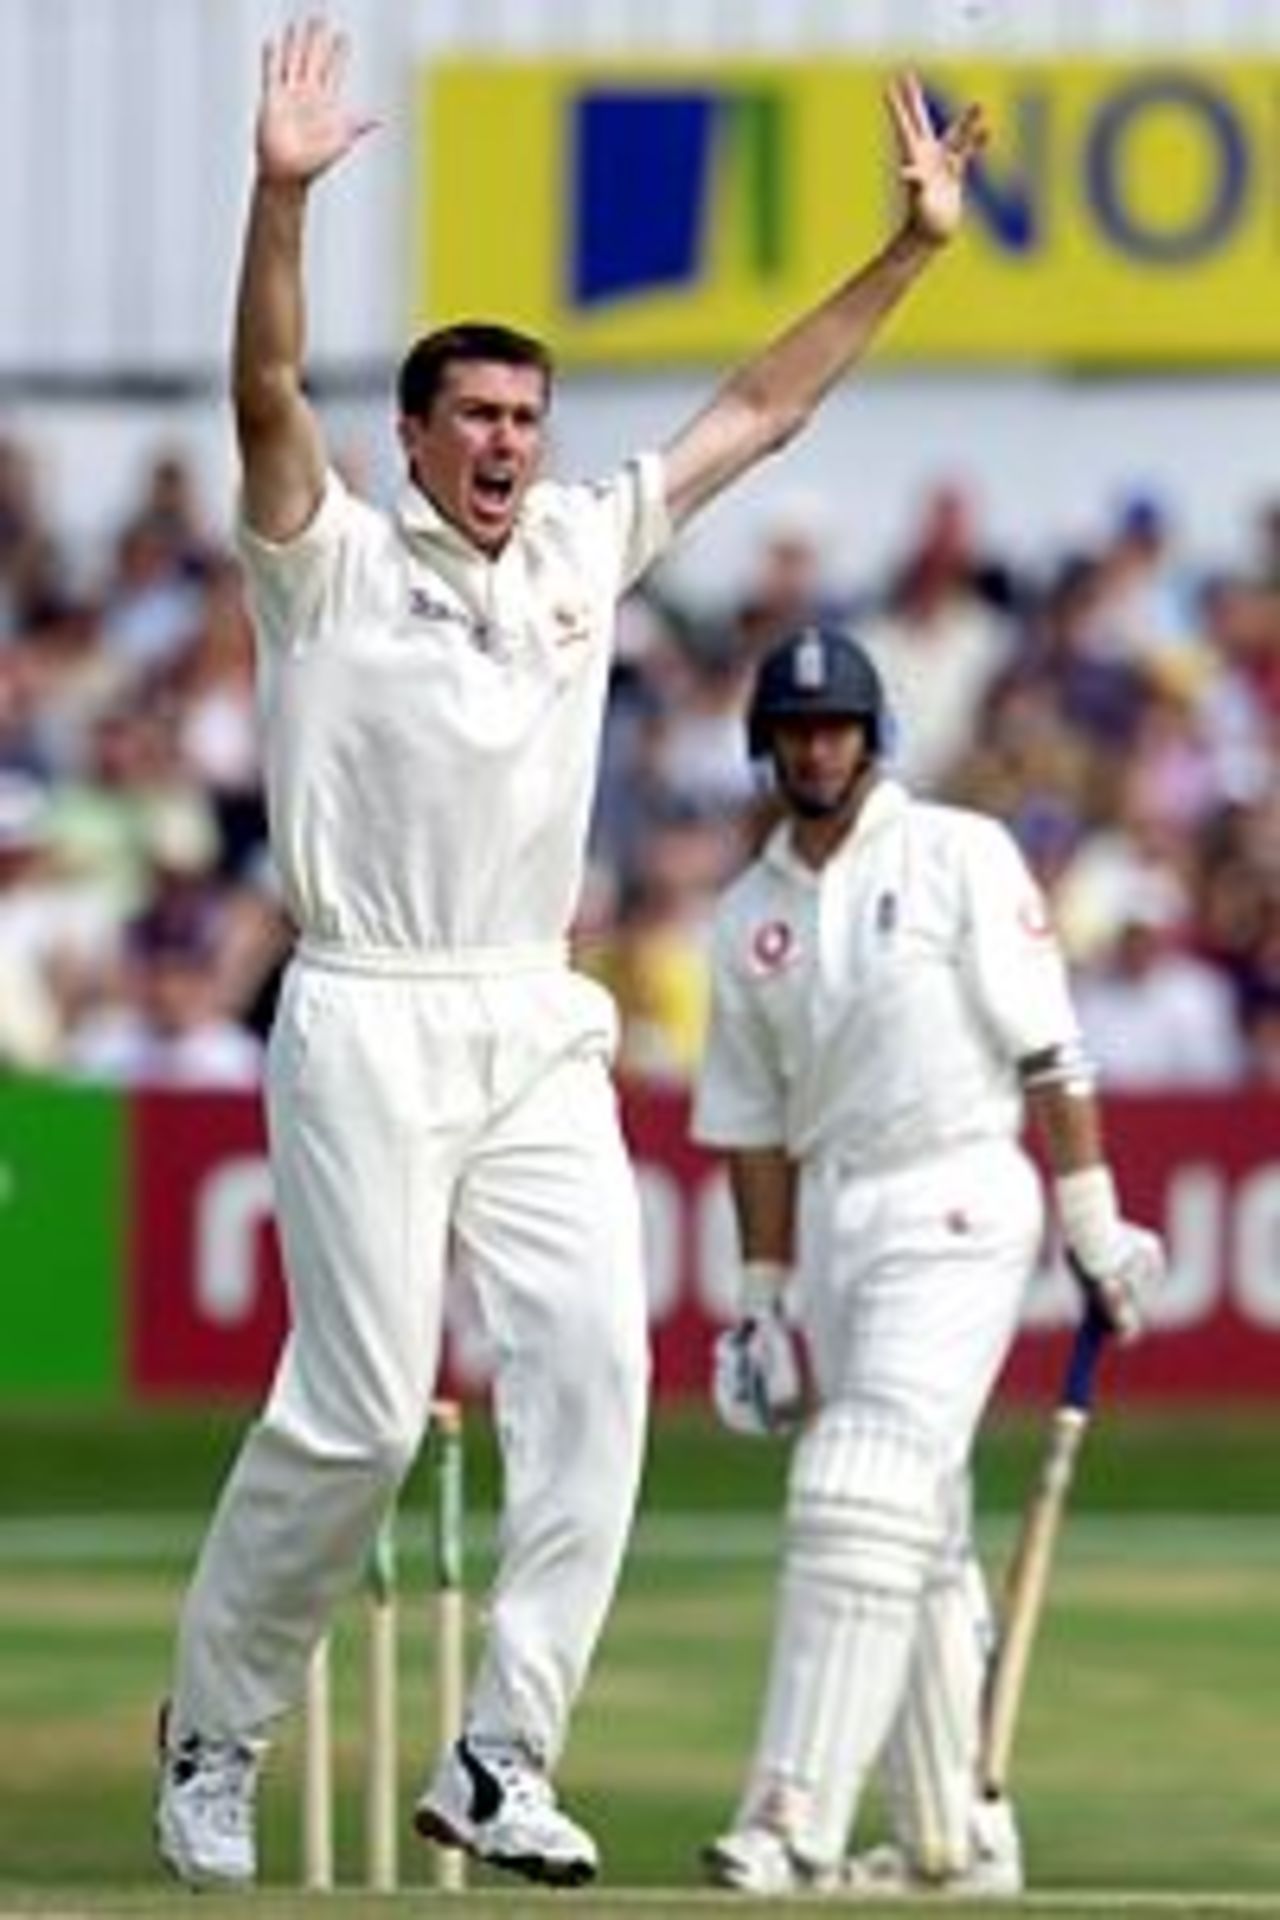 18 Aug 2001: Nasser Hussain of England is trapped lbw by Glenn McGrath of Australia during the 3rd day of the 4th Test Match between England and Australia at Headingley.